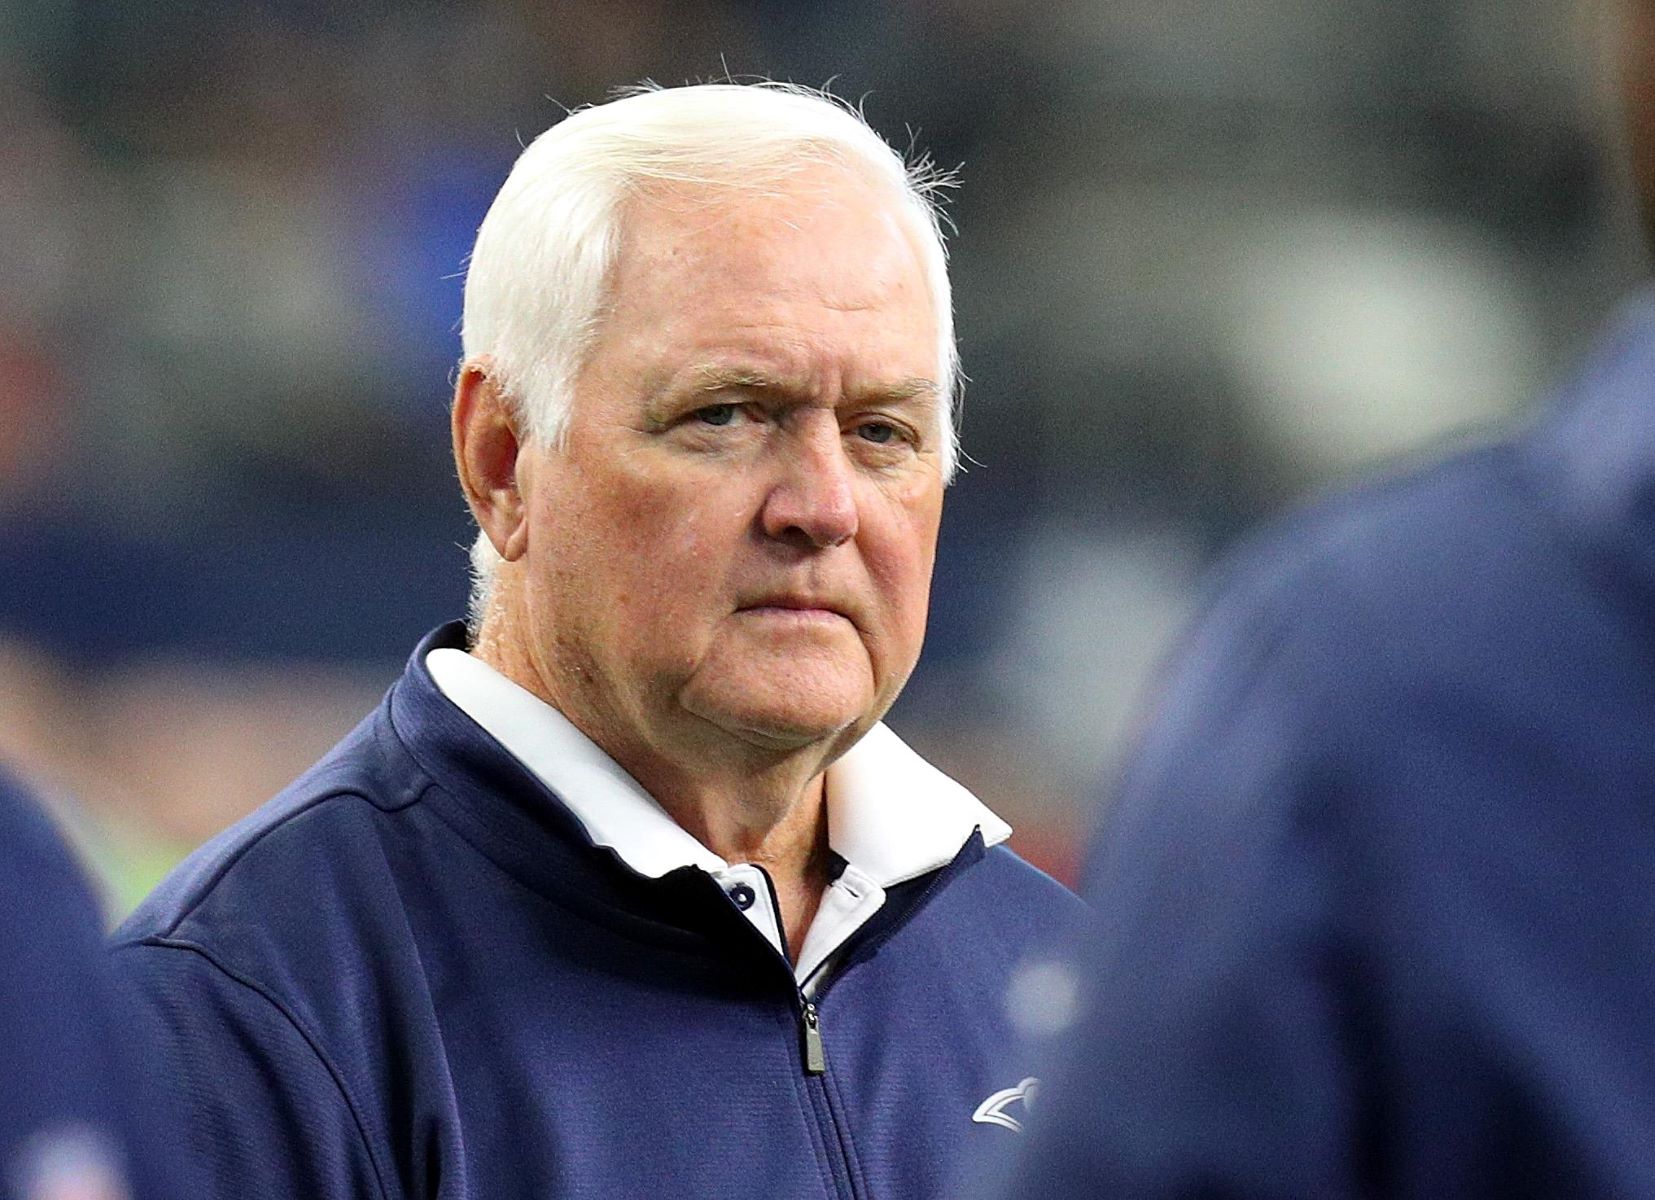 13 Fascinating Facts About Wade Phillips - Facts.net